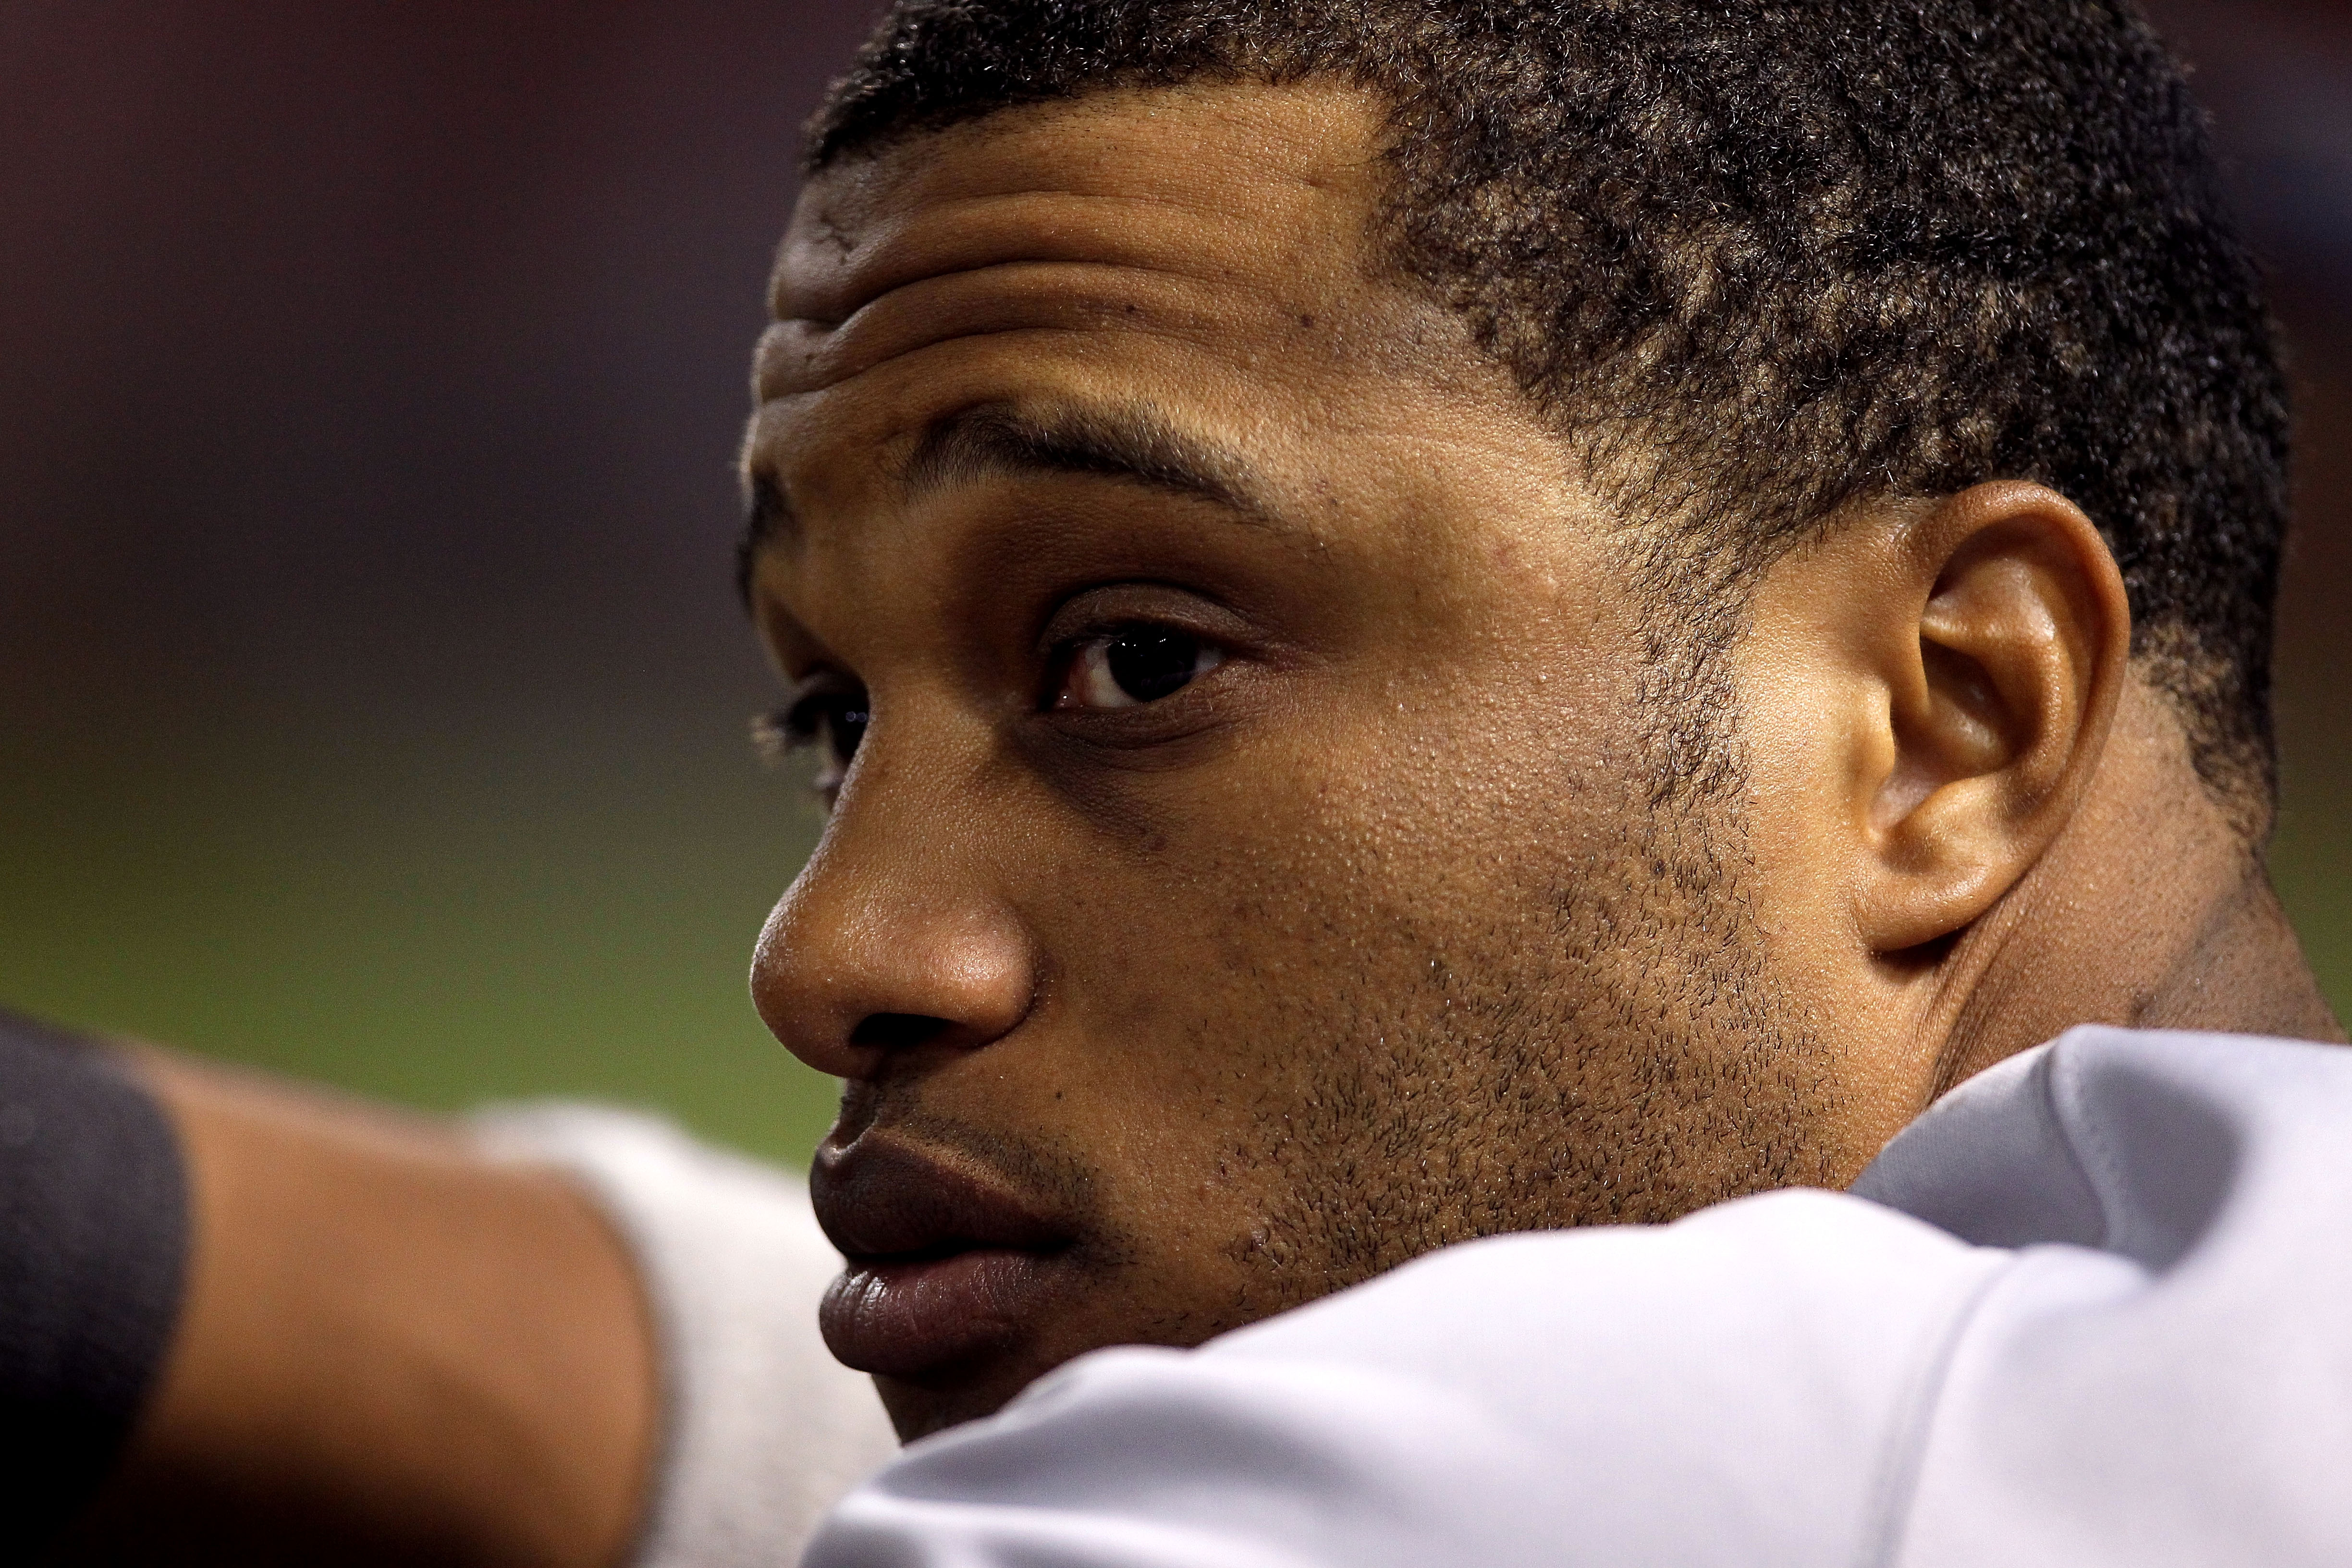 ARLINGTON, TX - OCTOBER 22:  Robinson Cano #24 of the New York Yankees looks on against the Texas Rangers in Game Six of the ALCS during the 2010 MLB Playoffs at Rangers Ballpark in Arlington on October 22, 2010 in Arlington, Texas.  (Photo by Stephen Dun